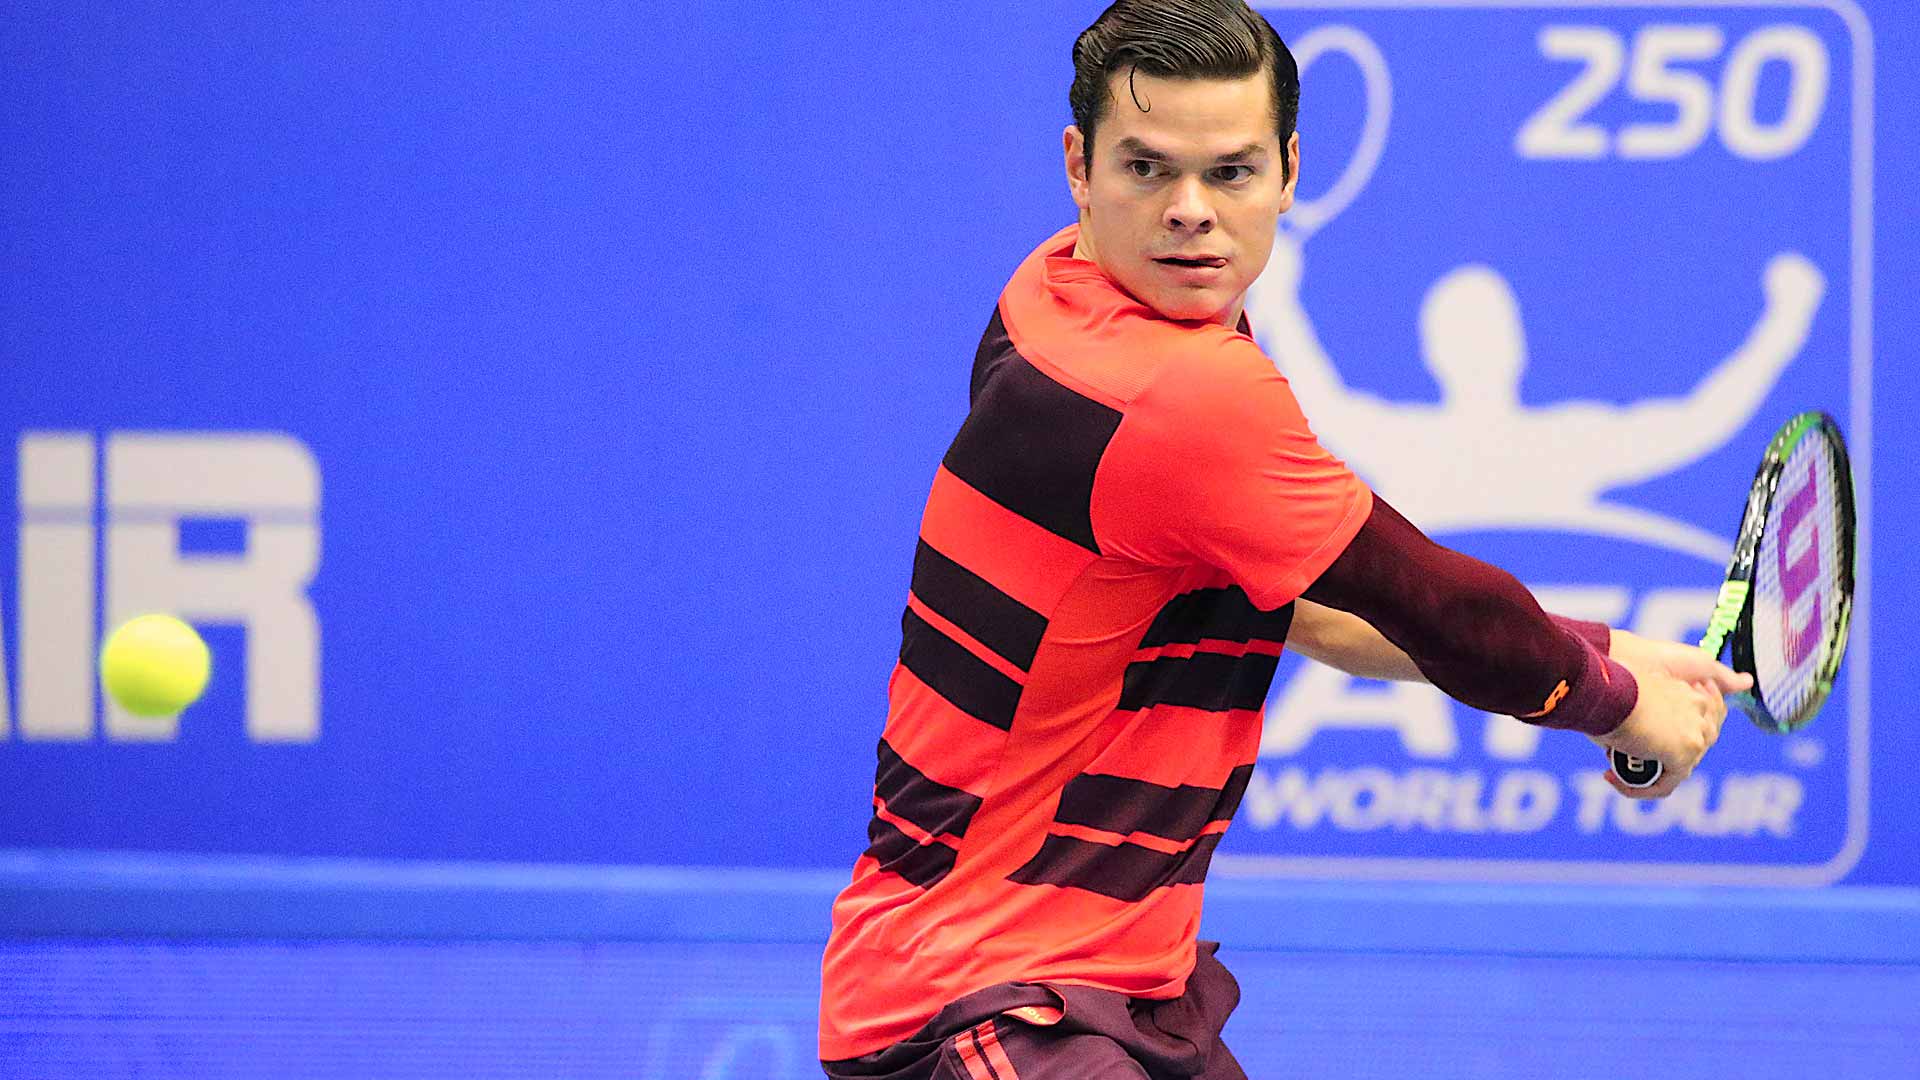 Raonic To Face Sousa In St. Petersburg Final